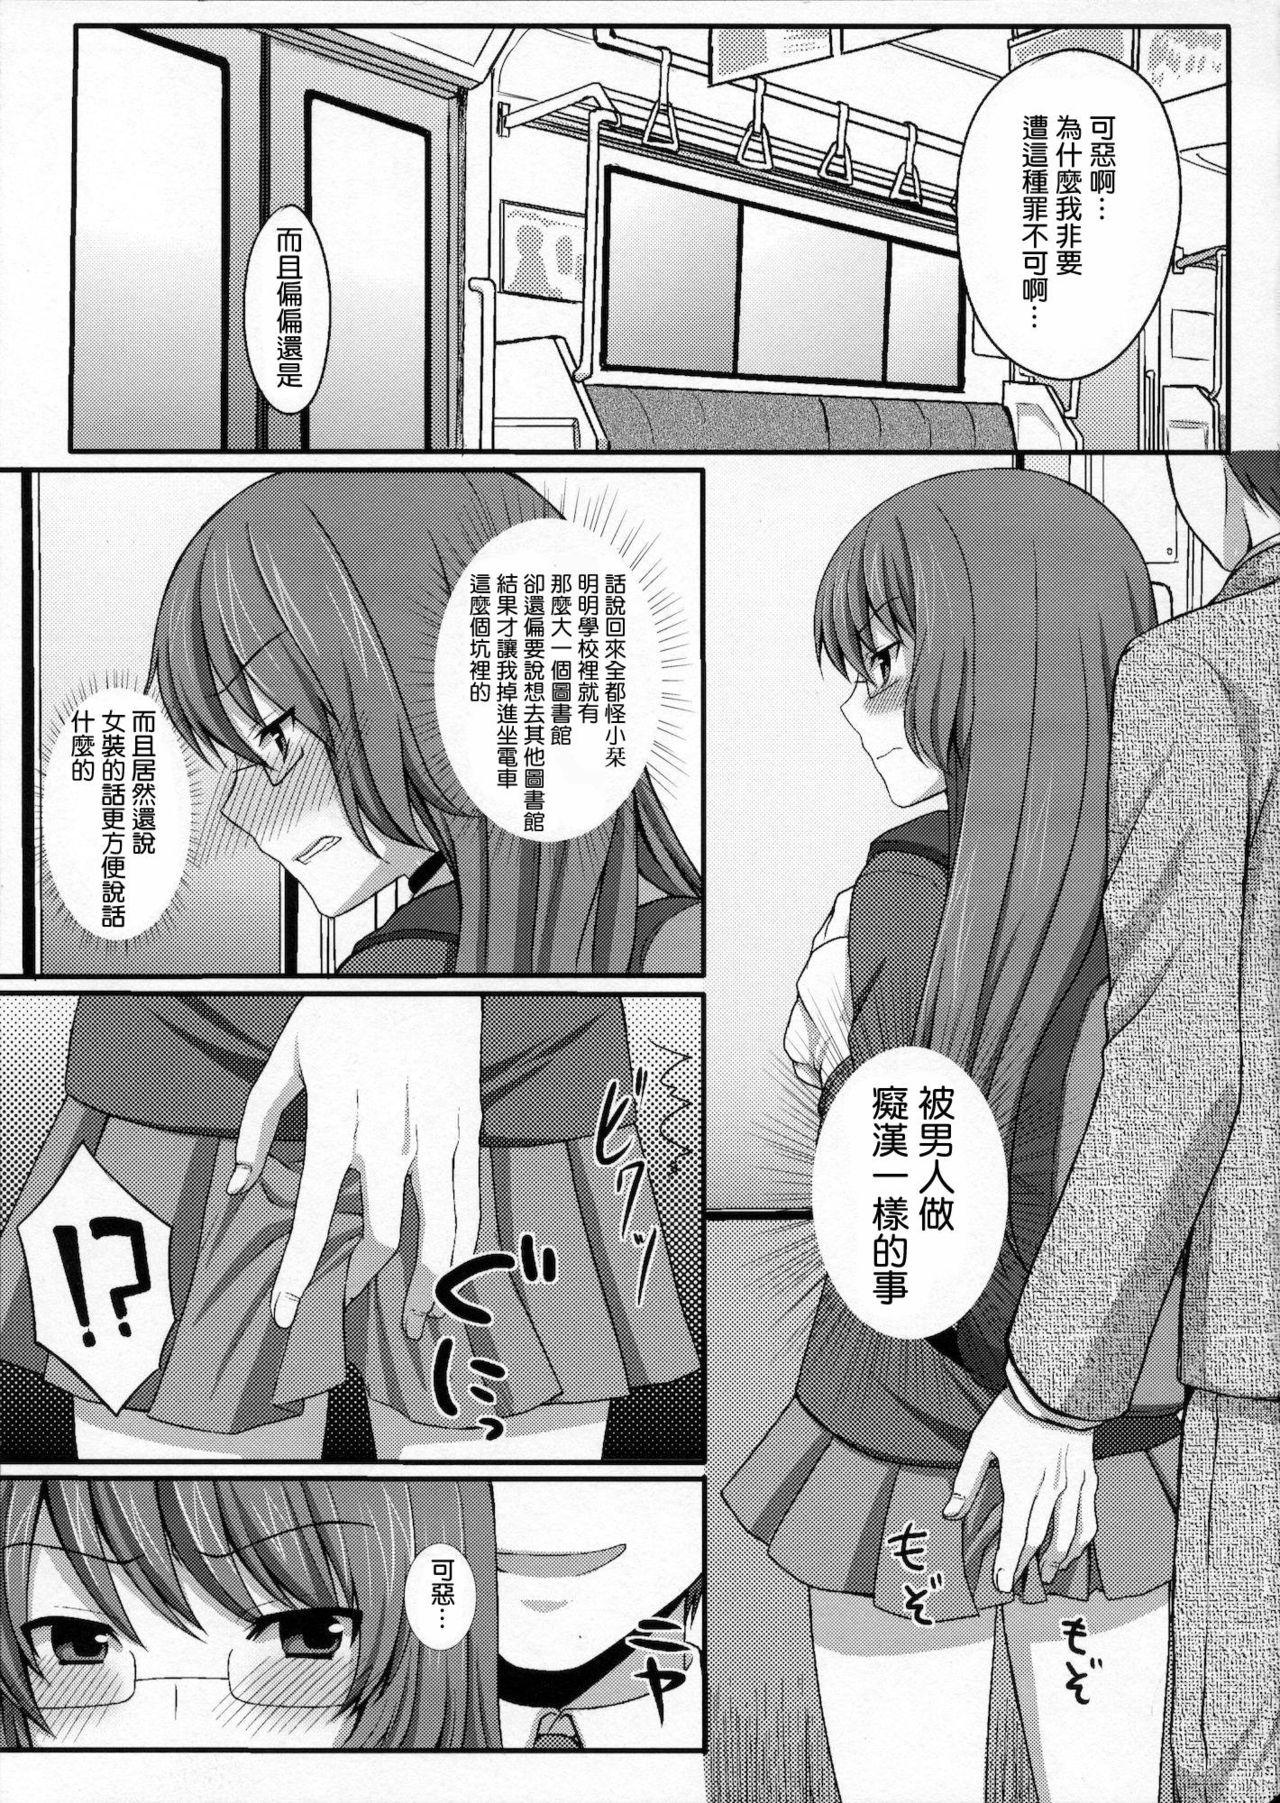 White Chick Kami-sama o Chikan - The world god only knows Dick - Page 2